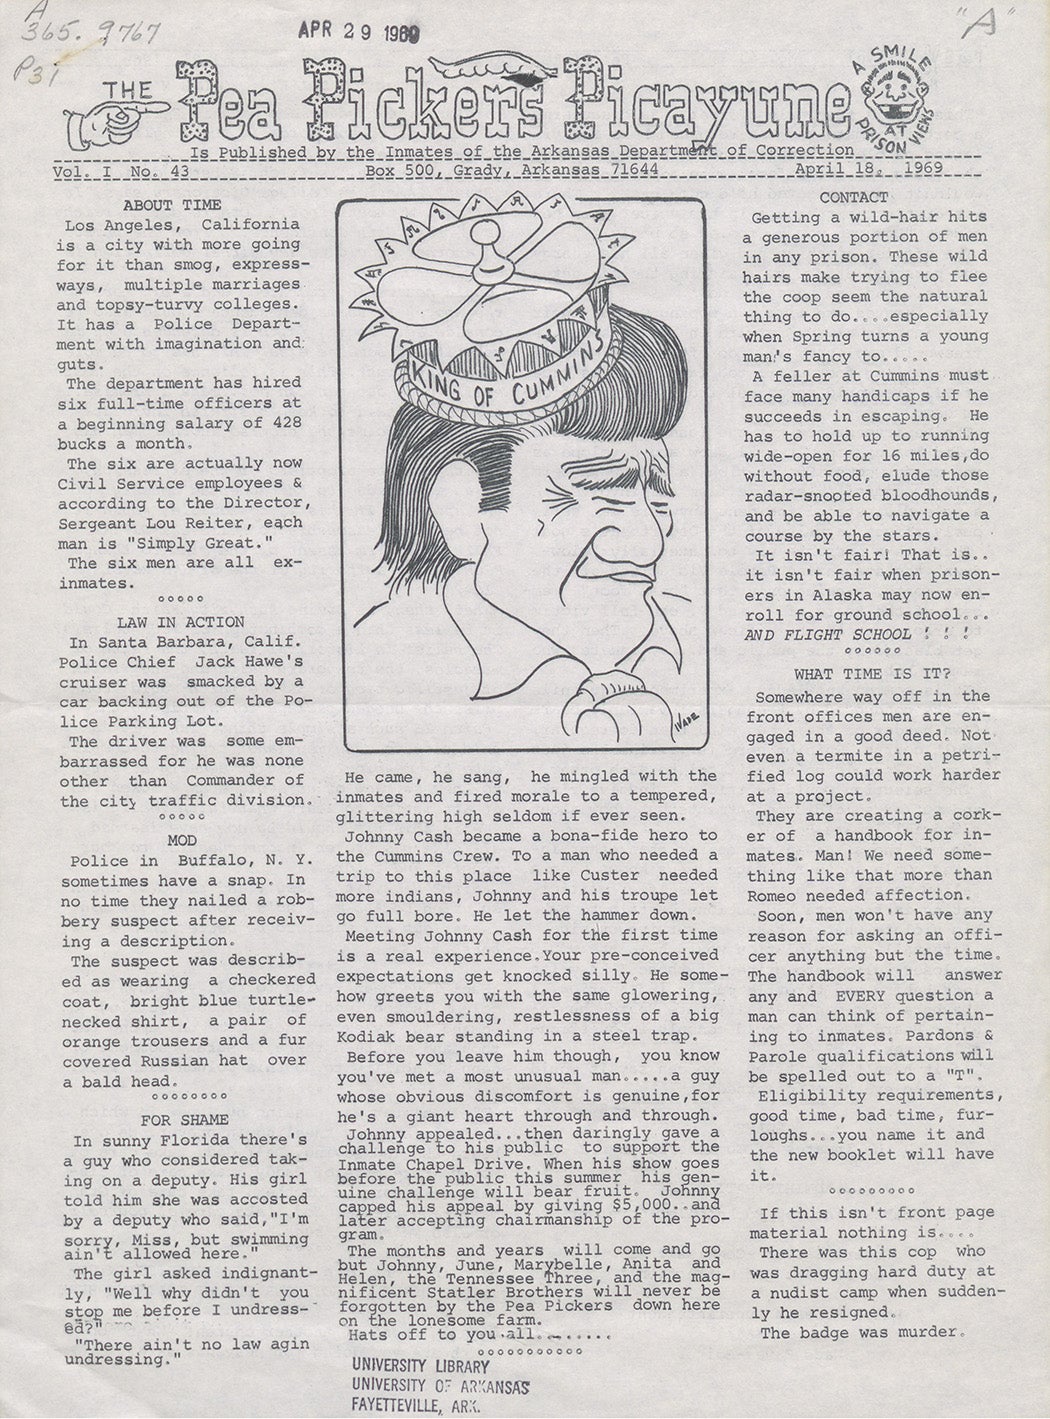 The cover of the April 18, 1969 issue of The Pea Pickers Picayune, published by inmates of the Arkansas Department of Correction 